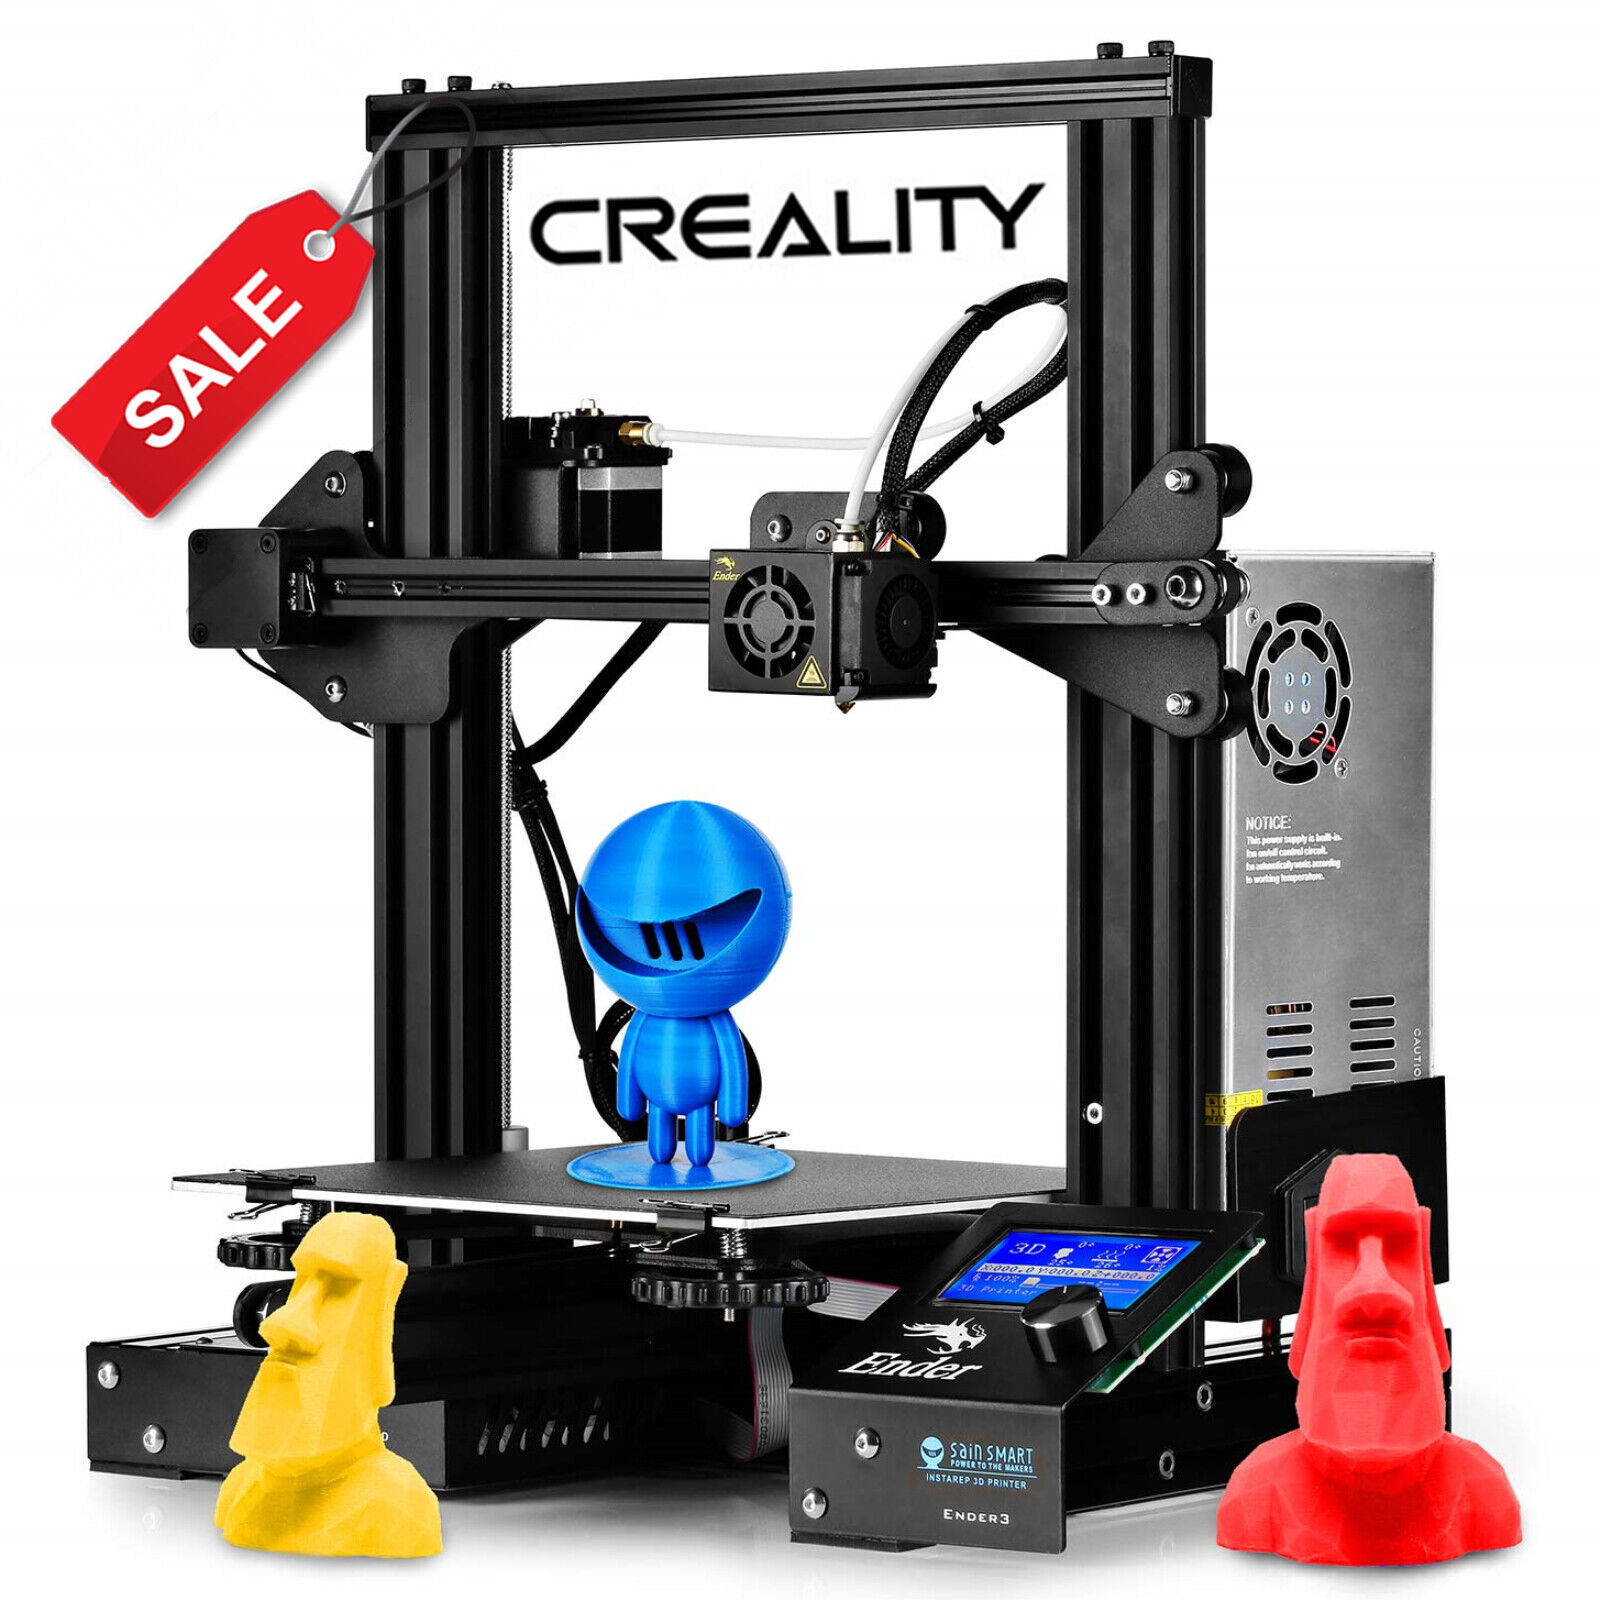 Creality Ender 3 3D Printer Fully Open Source with Resume Printing Function DIY 